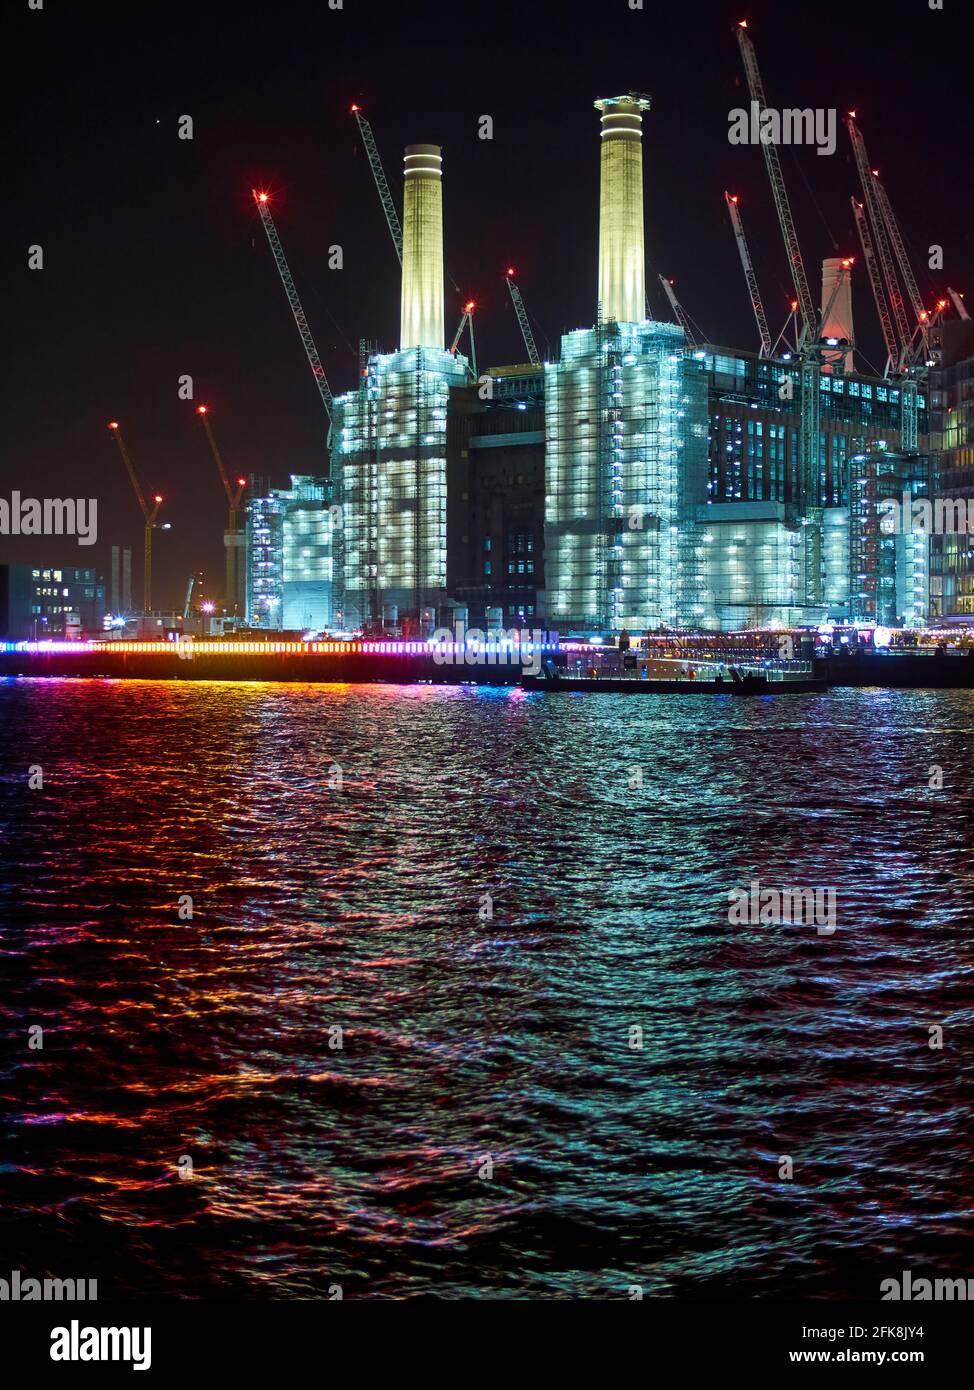 The iconic Battersea power station, illuminated with artificial lights, clad in hoardings and surrounded by cranes as it undergoes redevelopment. Stock Photo